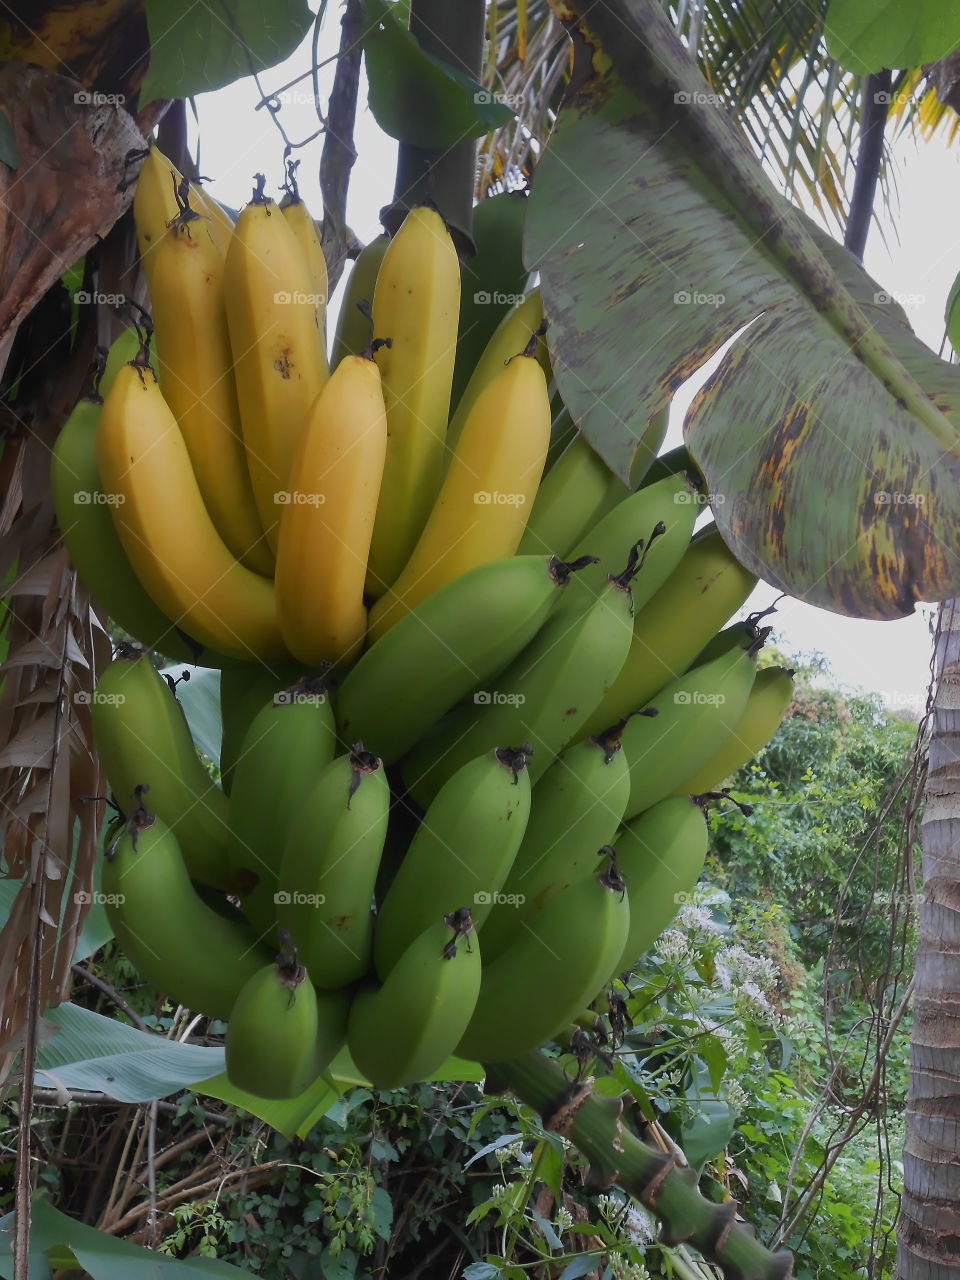 Hanging Bunch With Ripe and Unripe Bananas